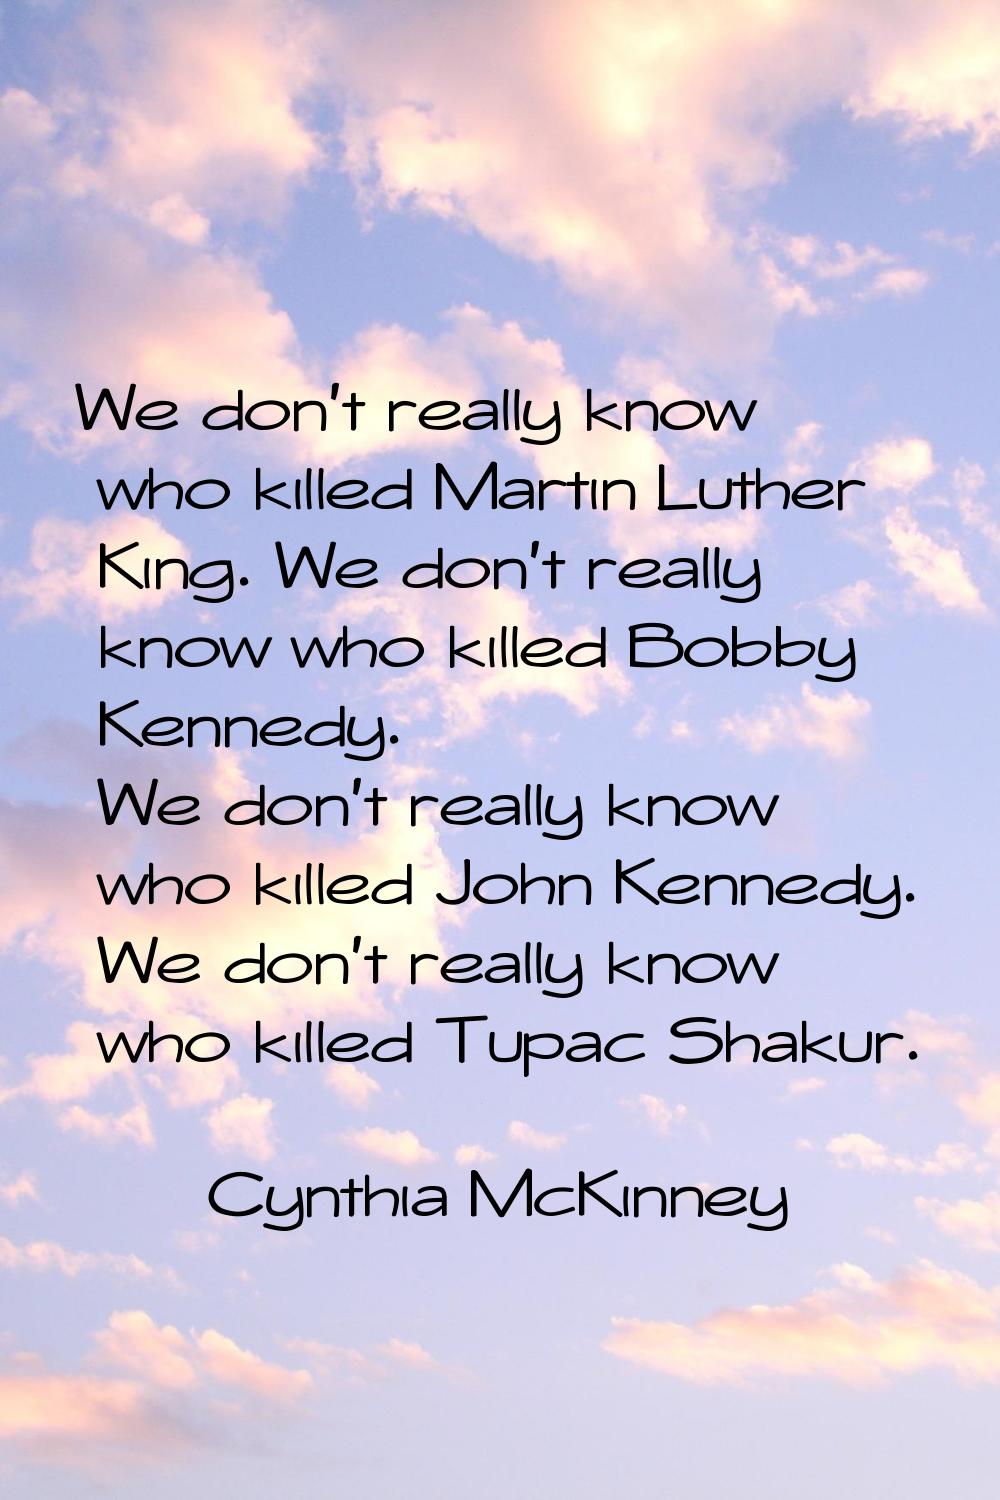 We don't really know who killed Martin Luther King. We don't really know who killed Bobby Kennedy. 